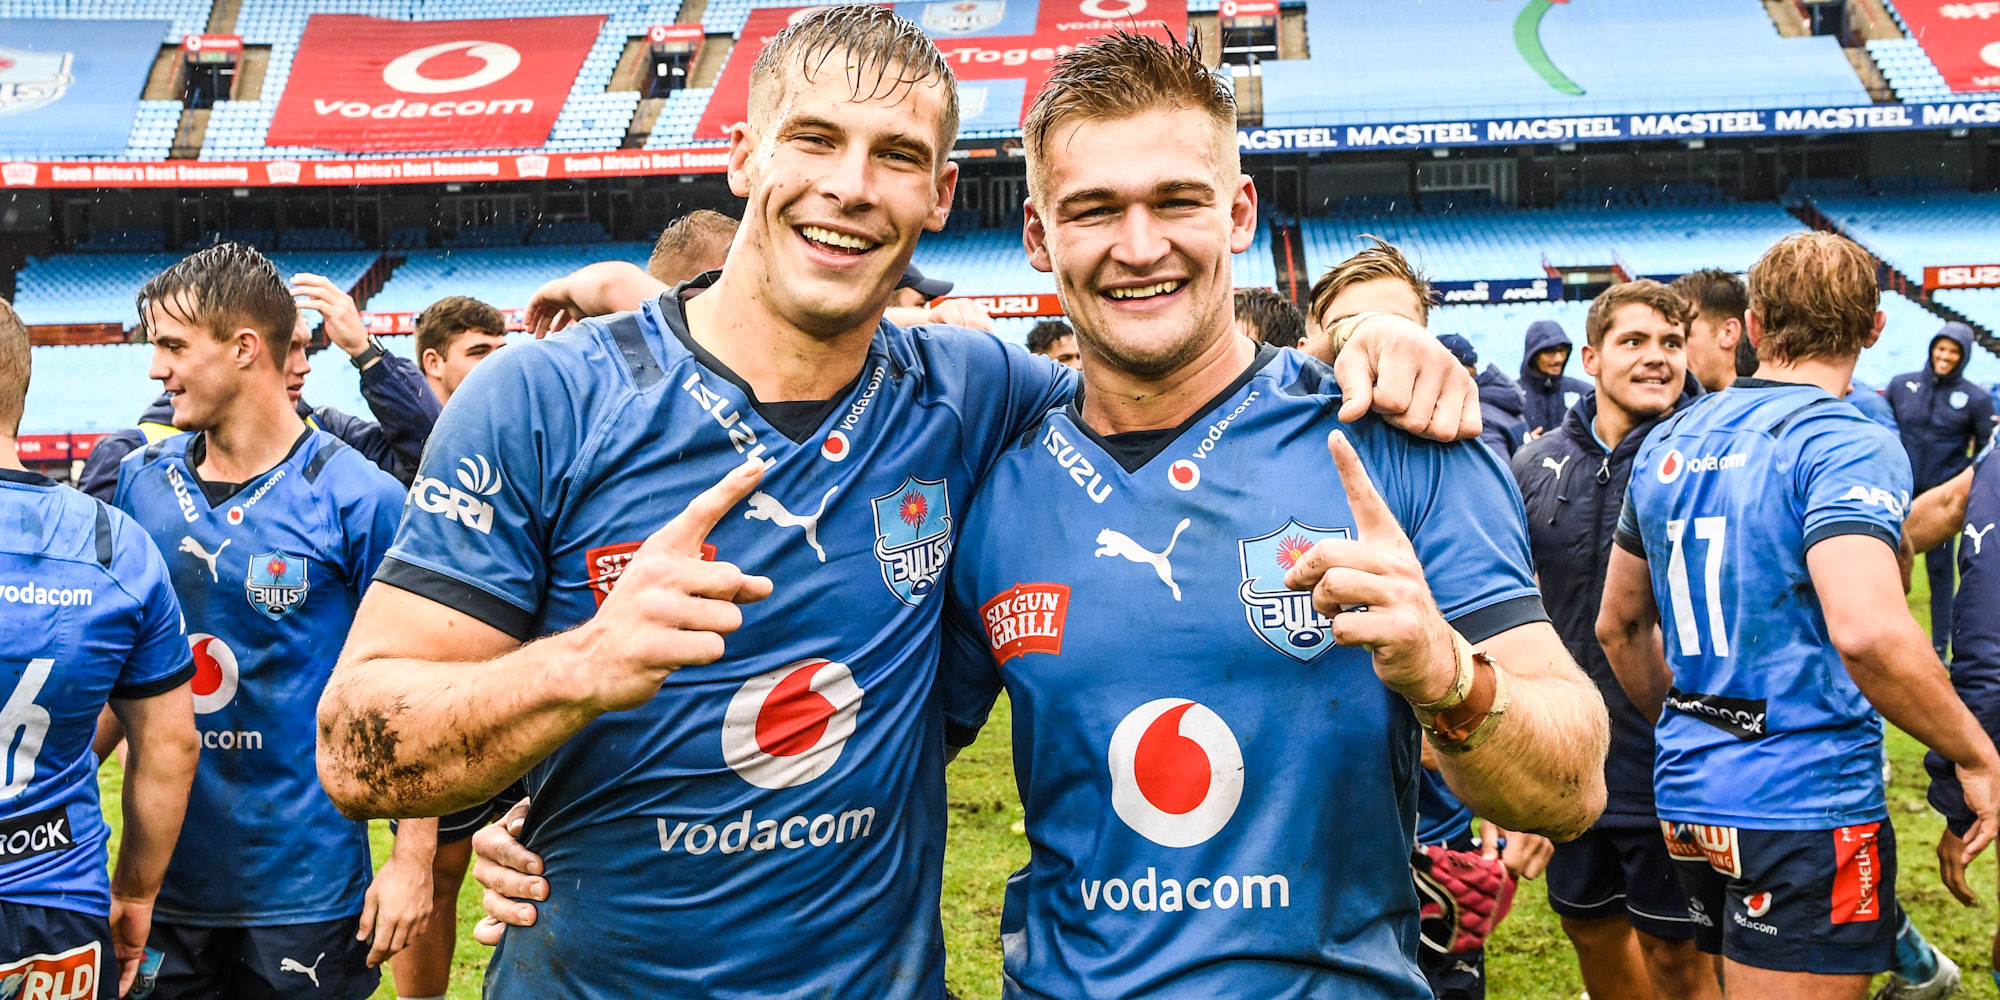 Cameron Hanekom and Eric Basson of the Vodacom Bulls celebrate winning the SA Rugby U20 Cup title.